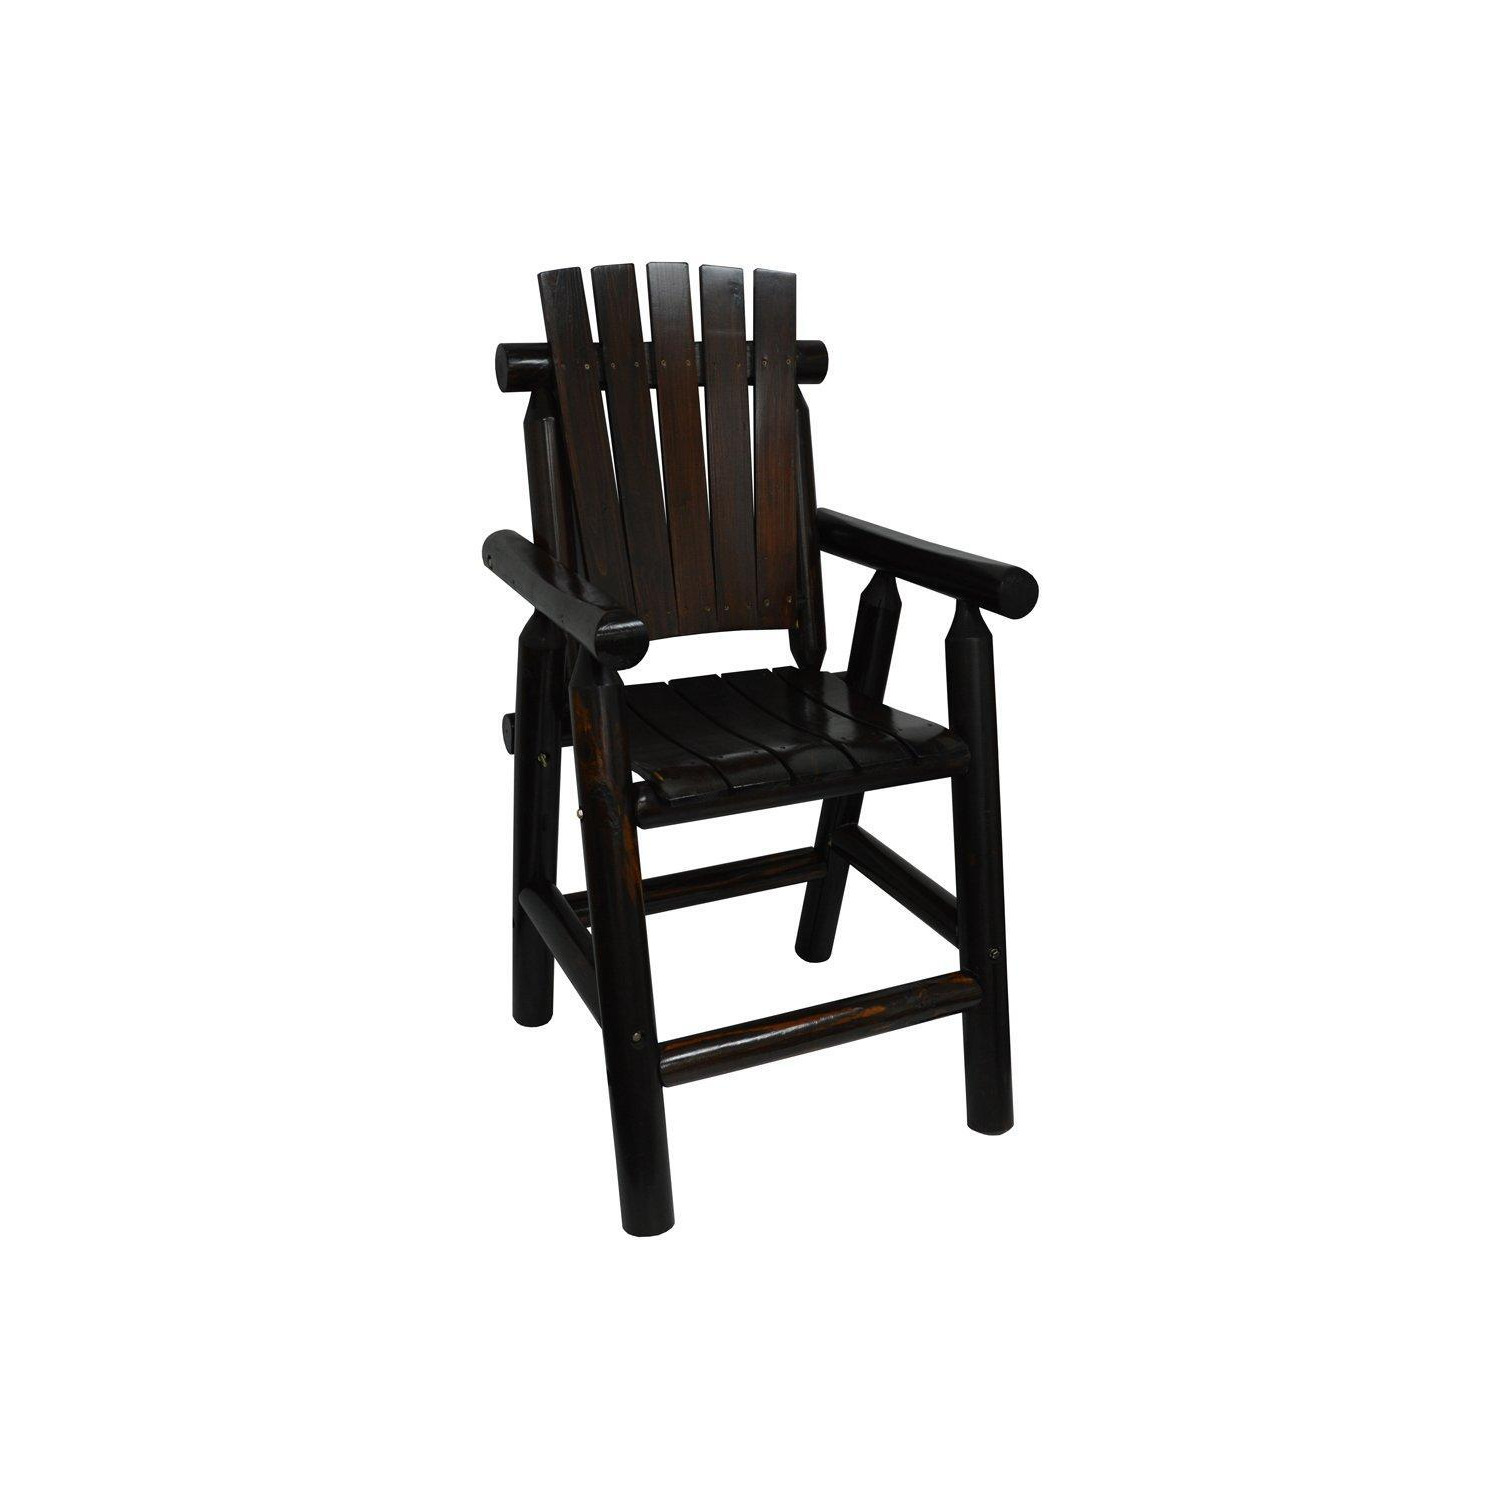 Watsons - Large Bar Chair Outdoor Wooden - Burntwood - image 1